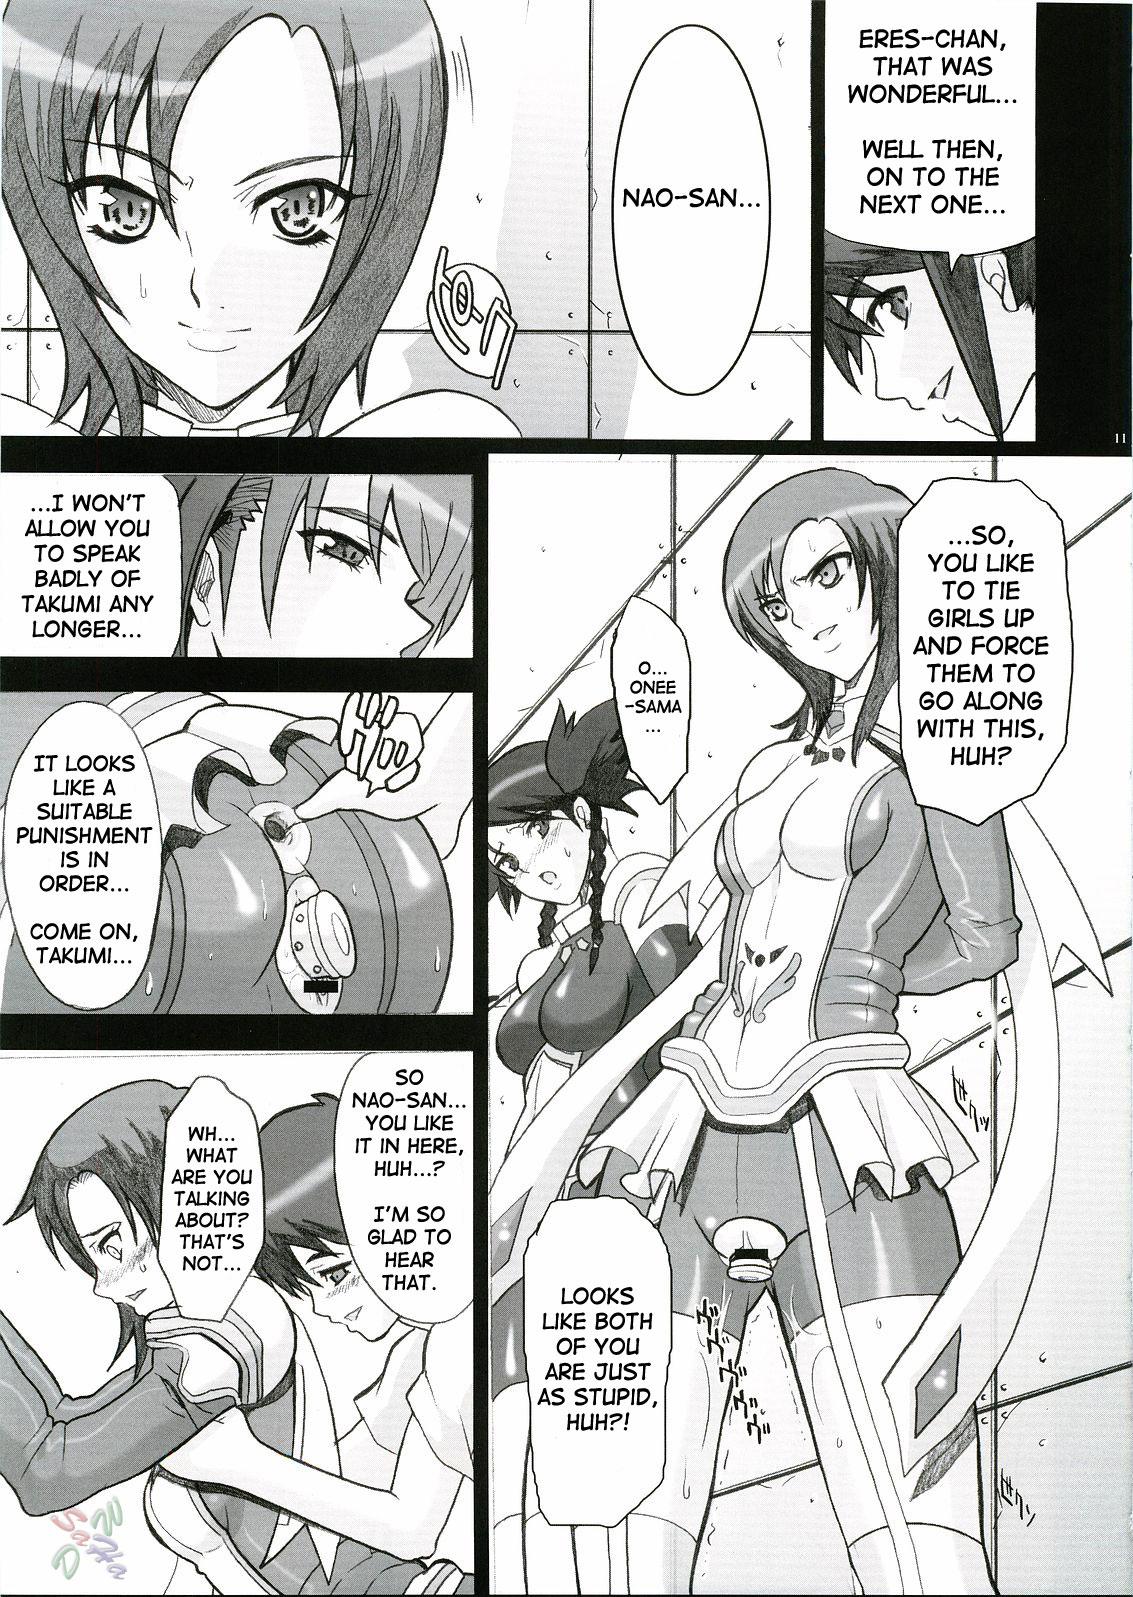 Outdoors IMPERIAL DAYS - Mai-otome Gayemo - Page 8